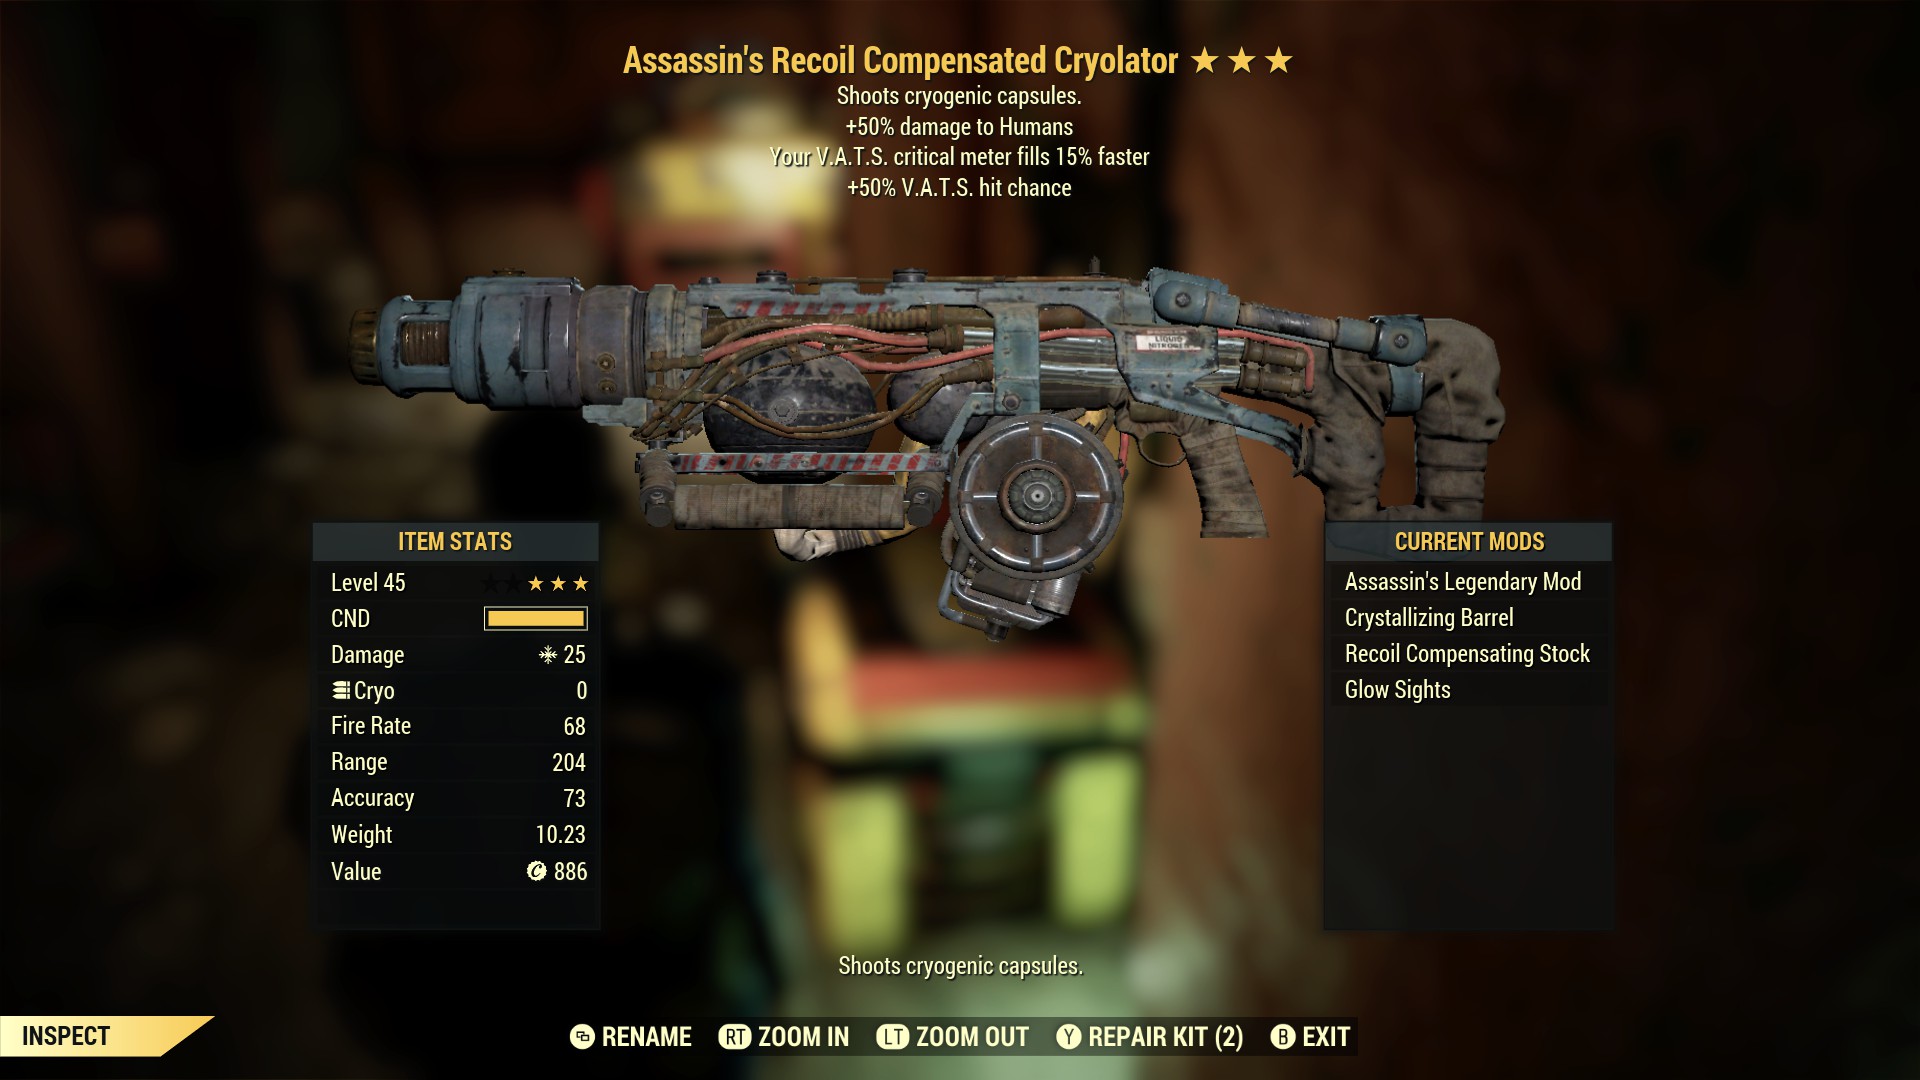 Assassin's Recoil Compensated Cryolator